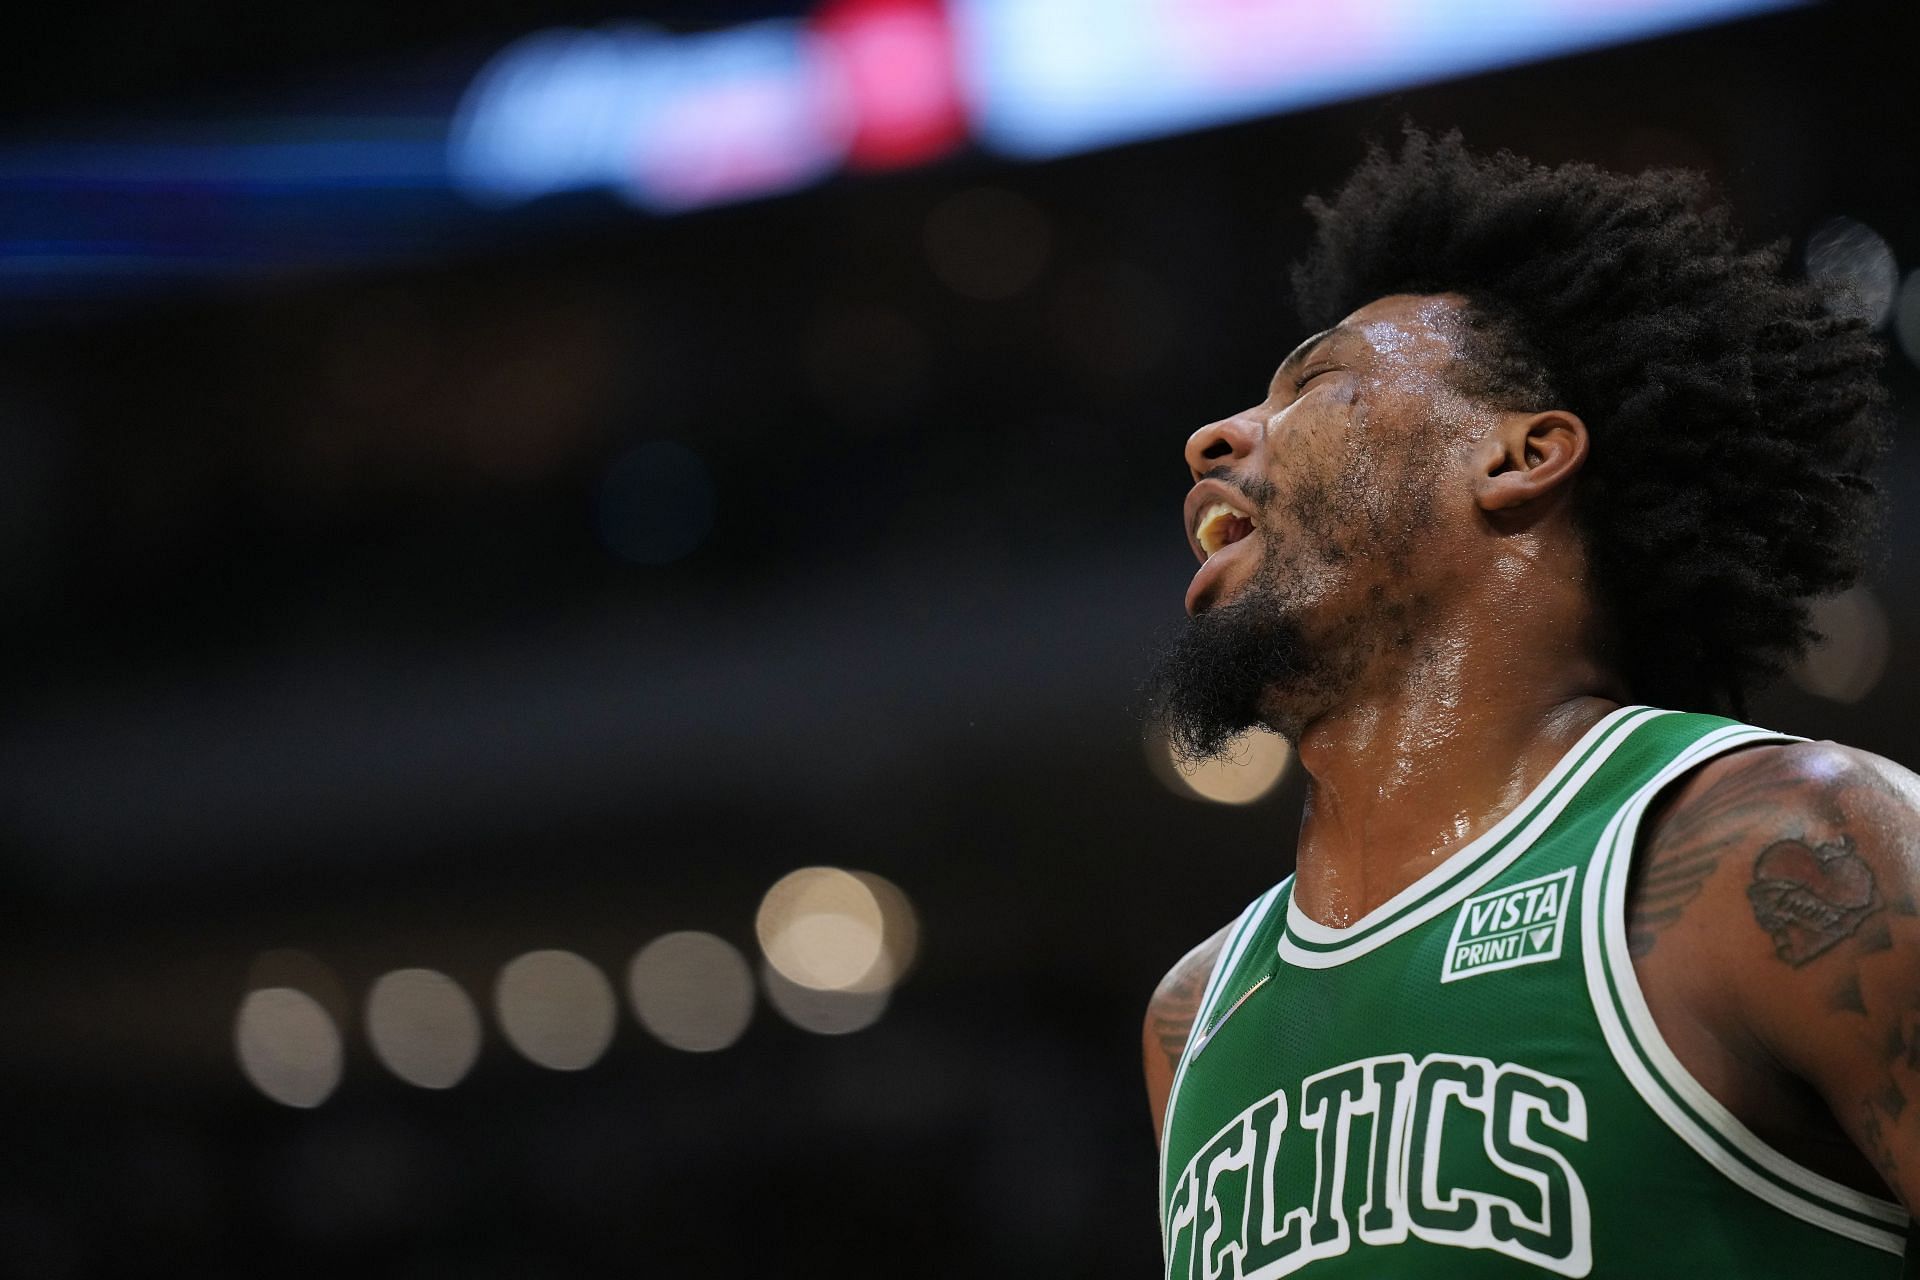 Marcus Smart in action at a Celtics game